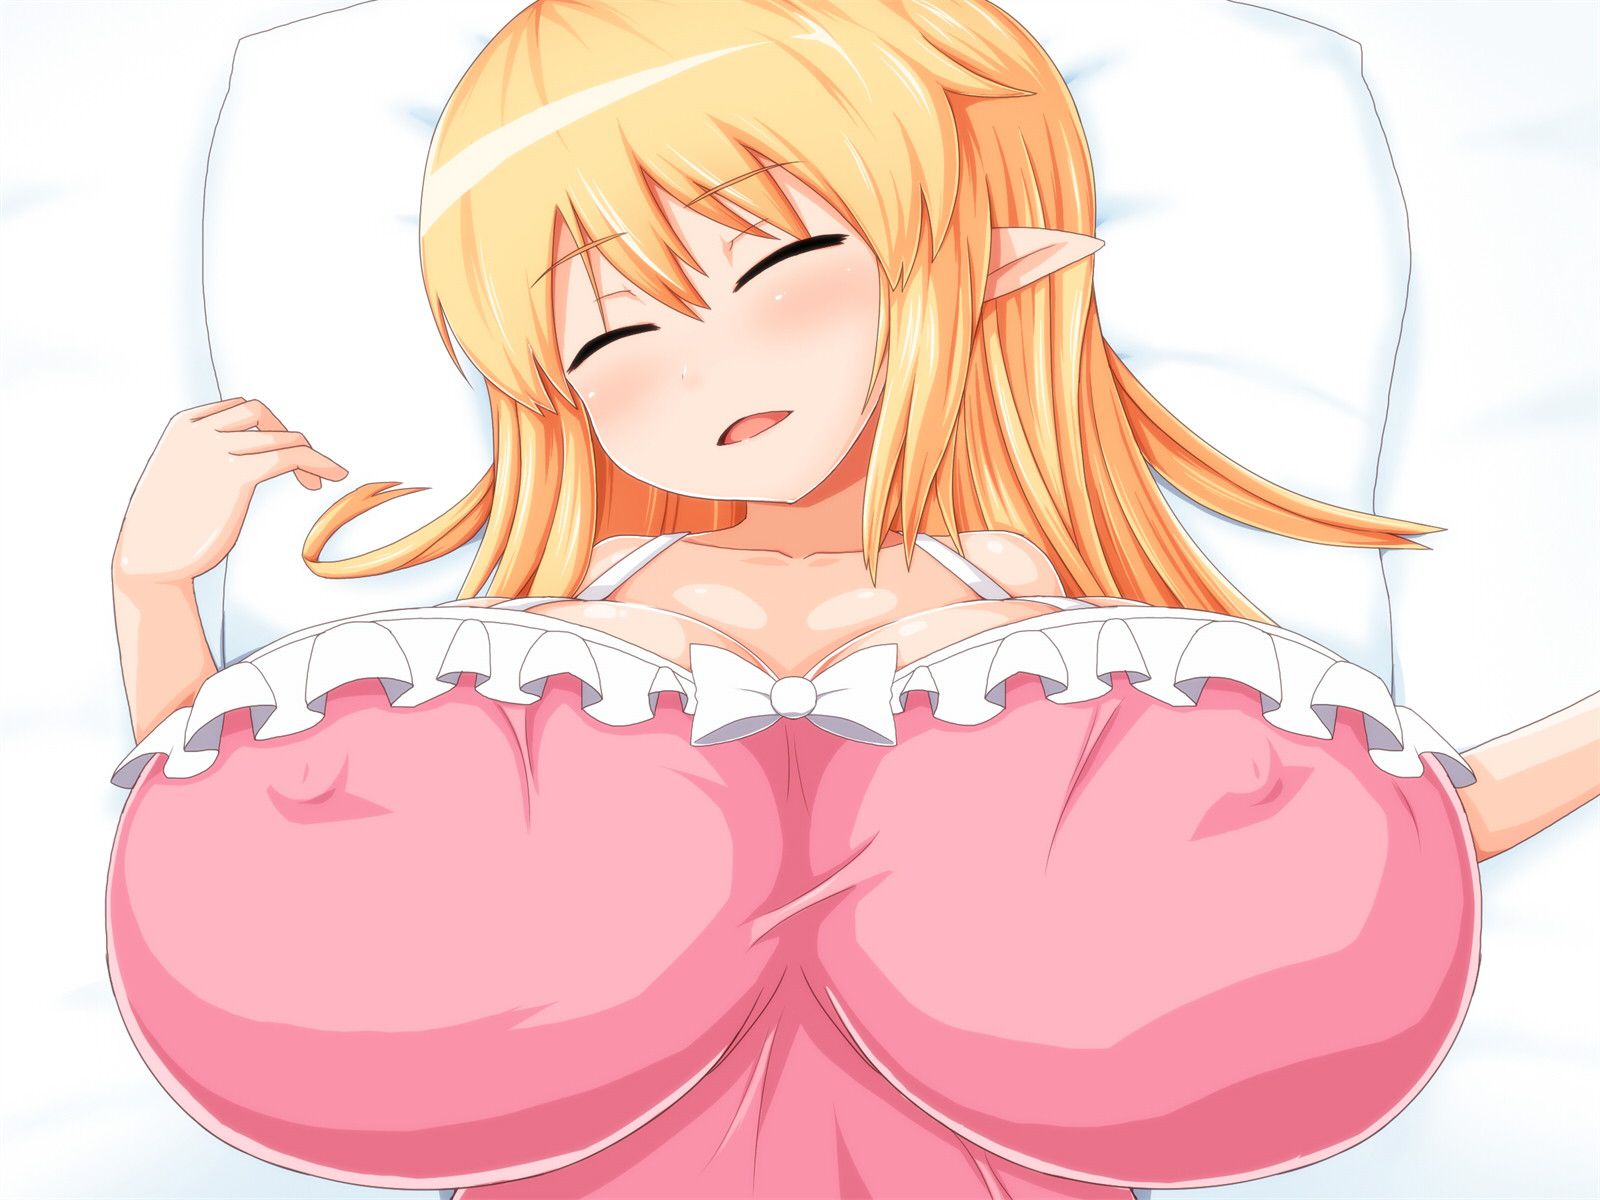 [2D] sleeping mischief mayu tentacle hentai images wwwwww (31 photos) 14